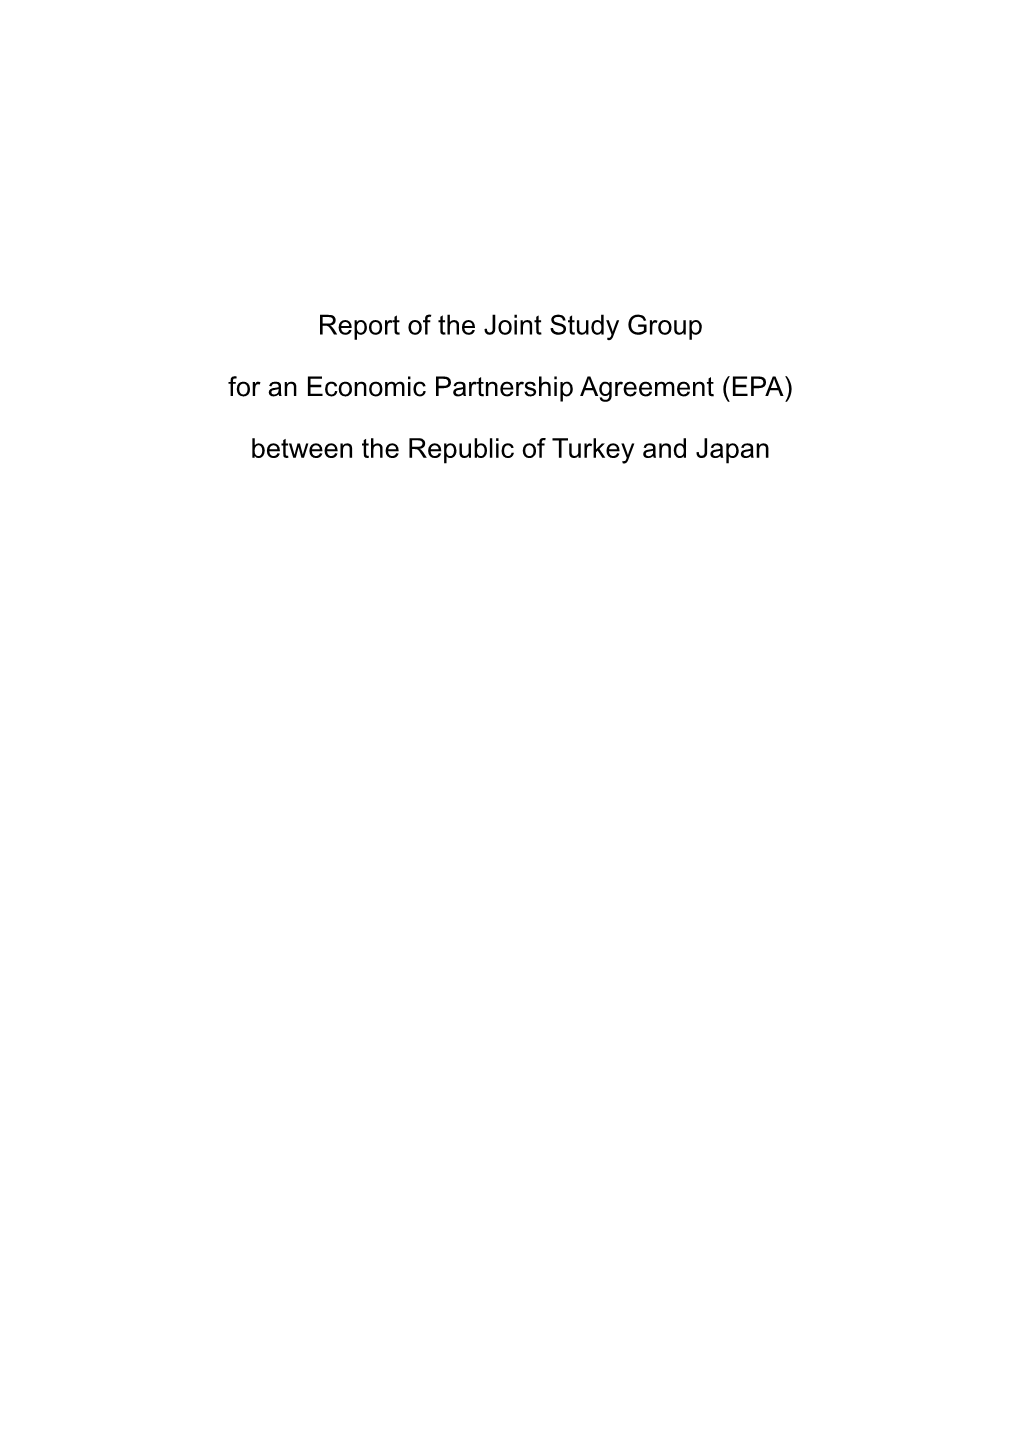 Report of the Joint Study Group for an Economic Partnership Agreement (EPA)